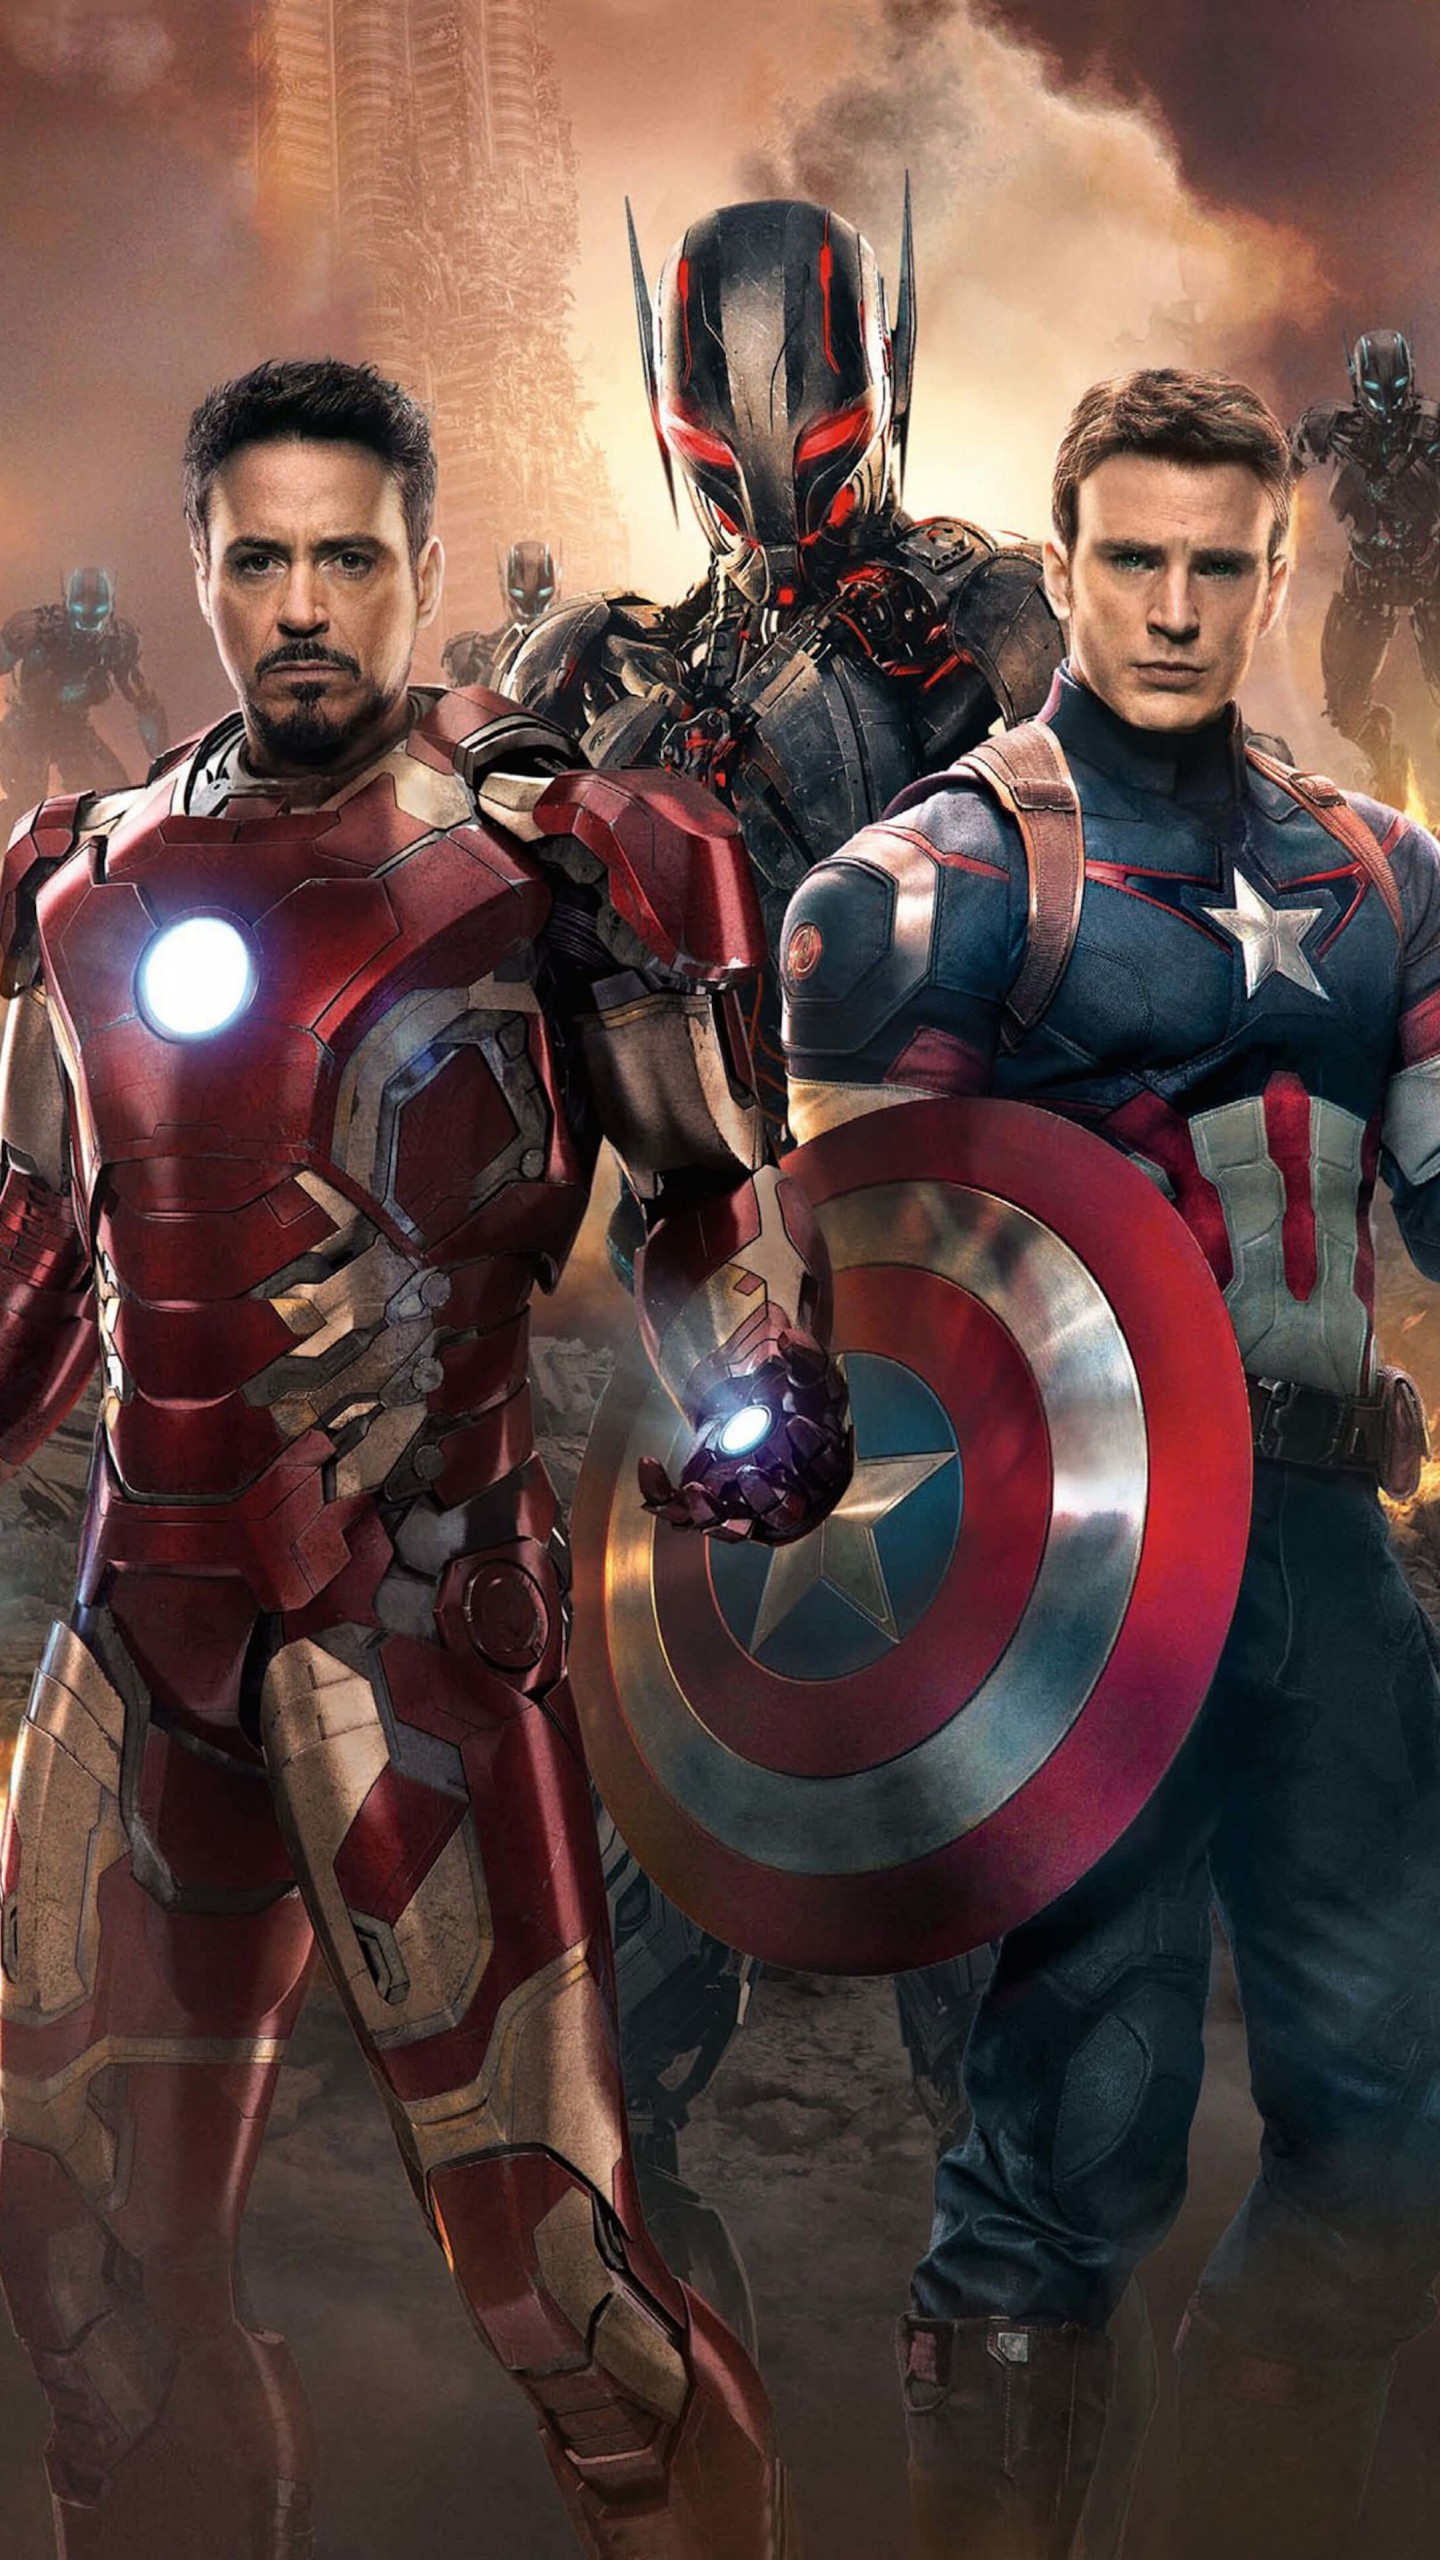 The Avengers: Age of Ultron - Iron Man and Captain America Wallpaper for LG G3